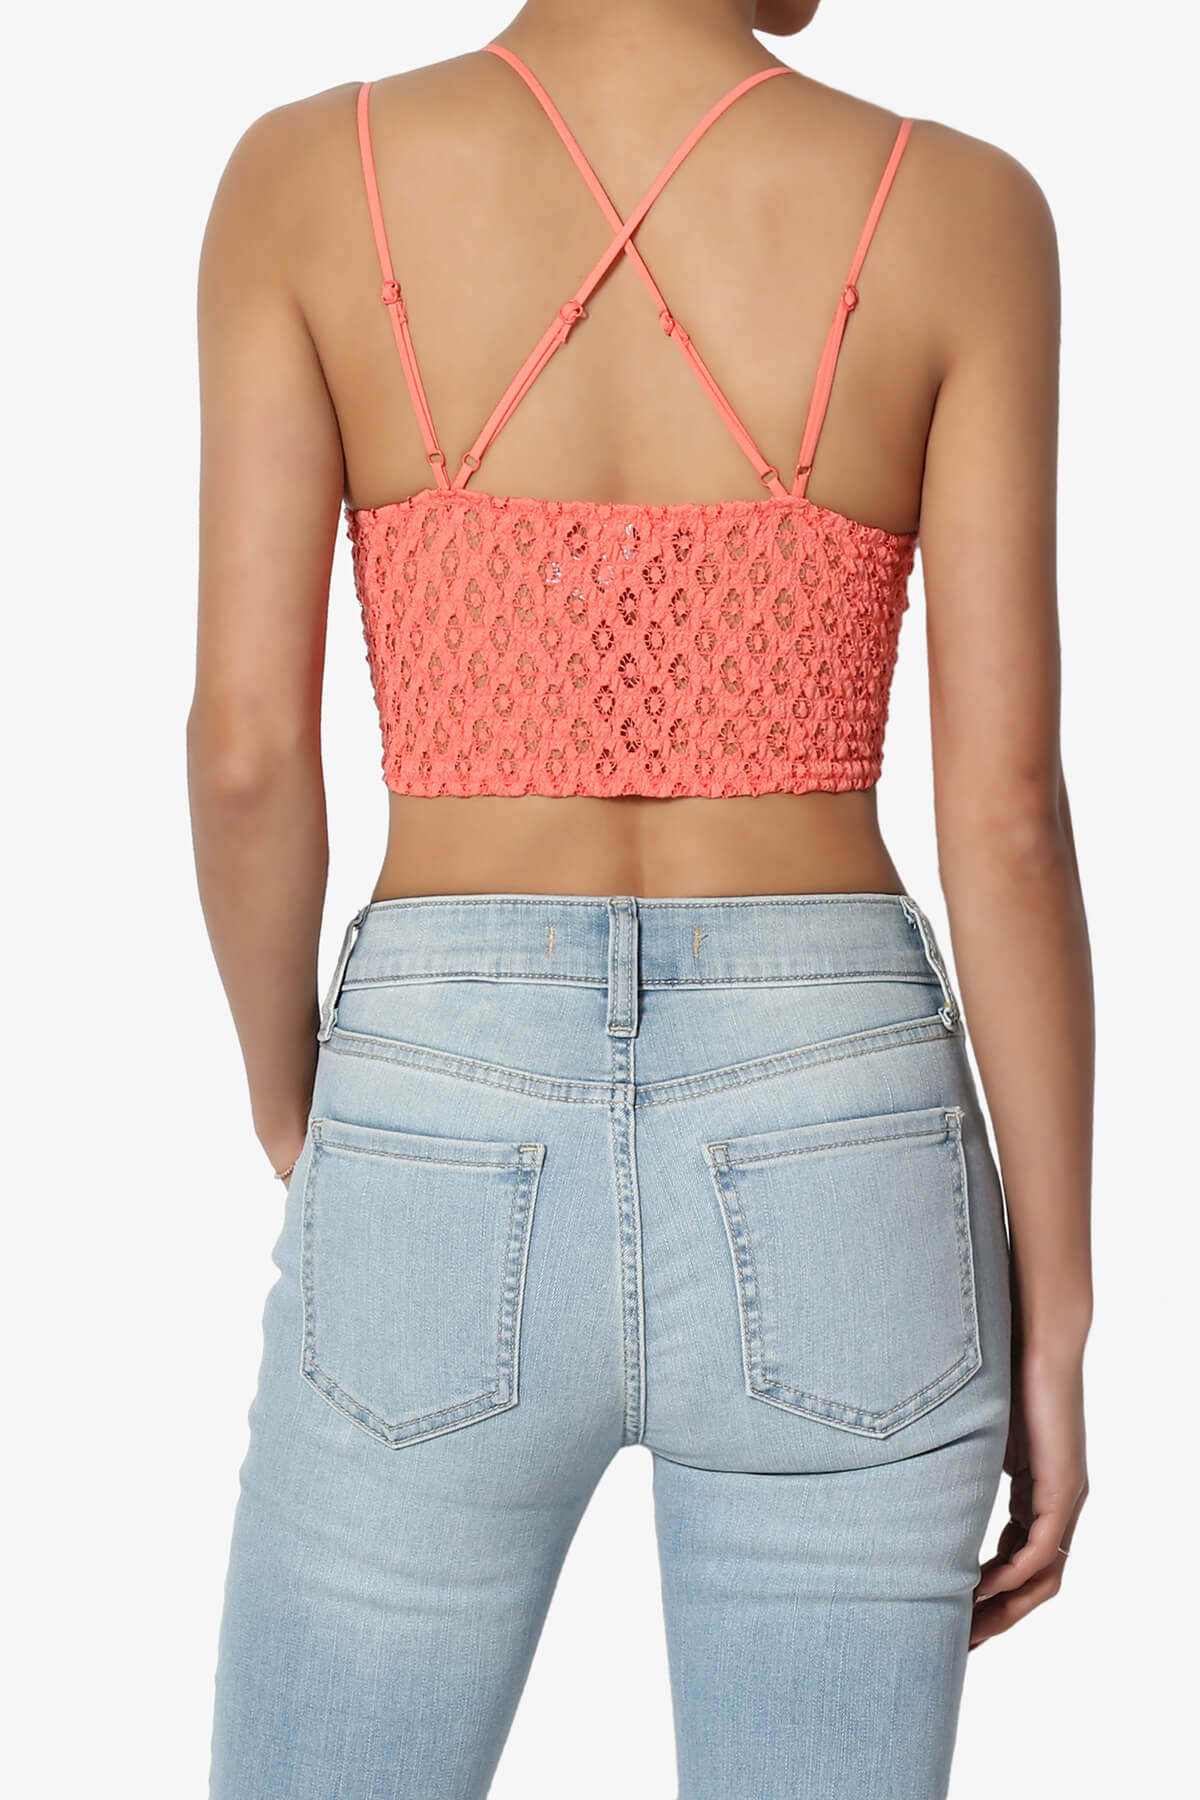 Load image into Gallery viewer, Adella Crochet Lace Bralette CORAL_2
